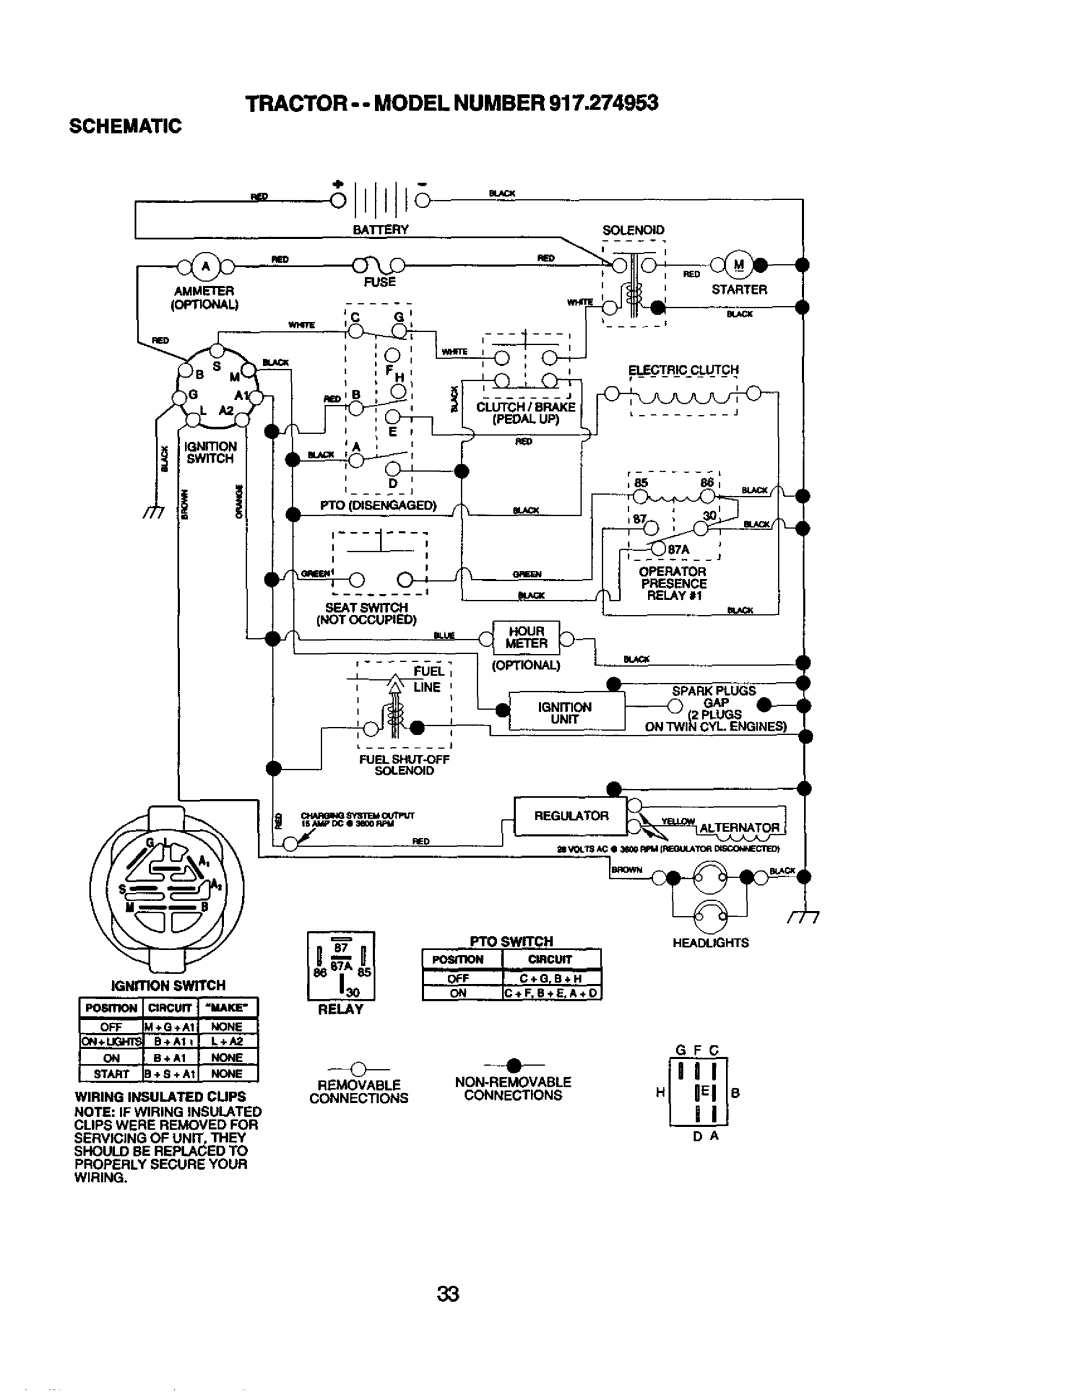 Craftsman 917.274953 manual Schematic, c.o., •, Connections 